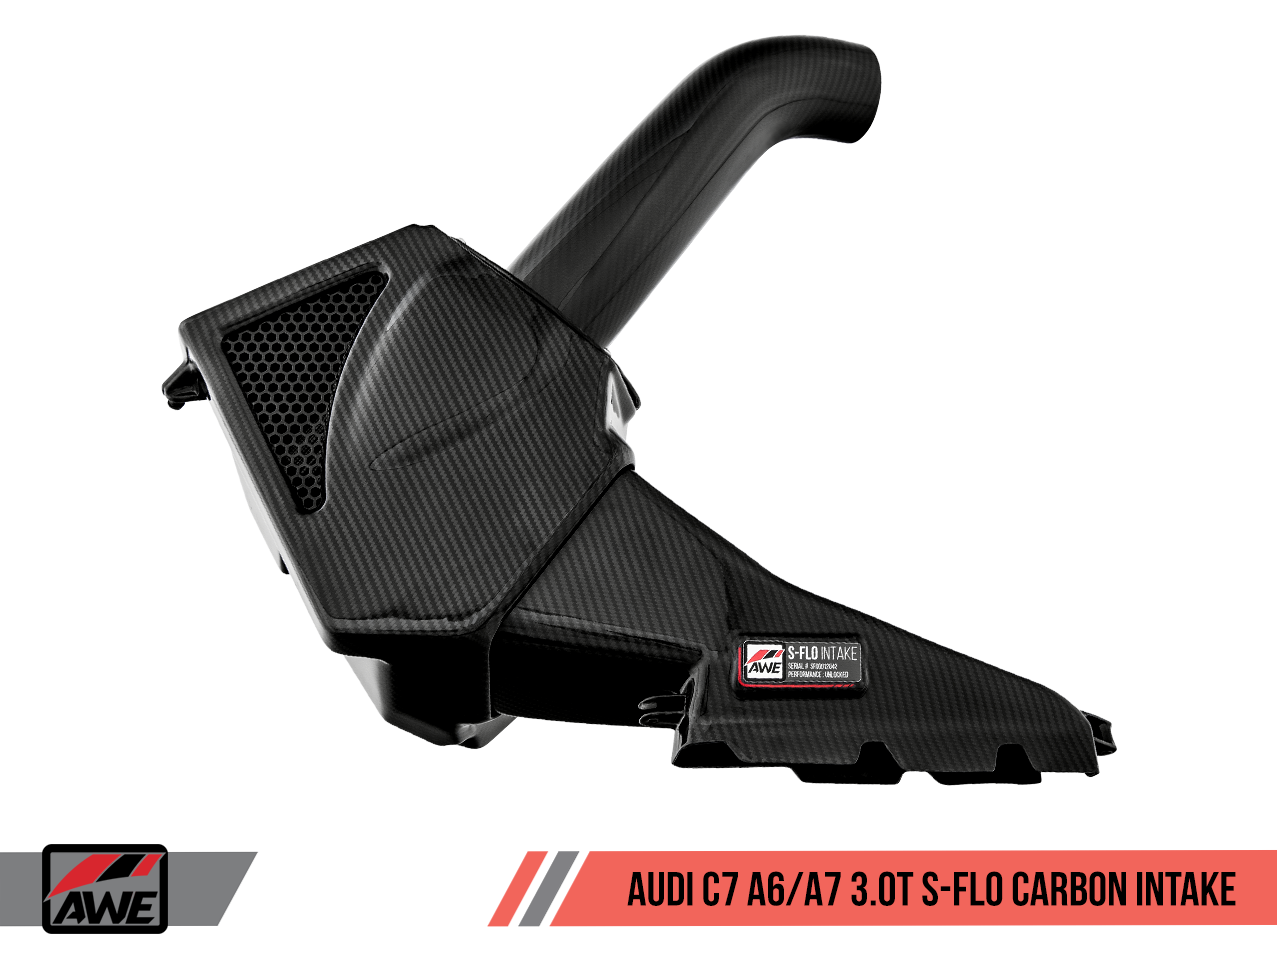 AWE S-FLO CARBON INTAKE FOR AUDI C7 A6 / A7 3.0T - 0